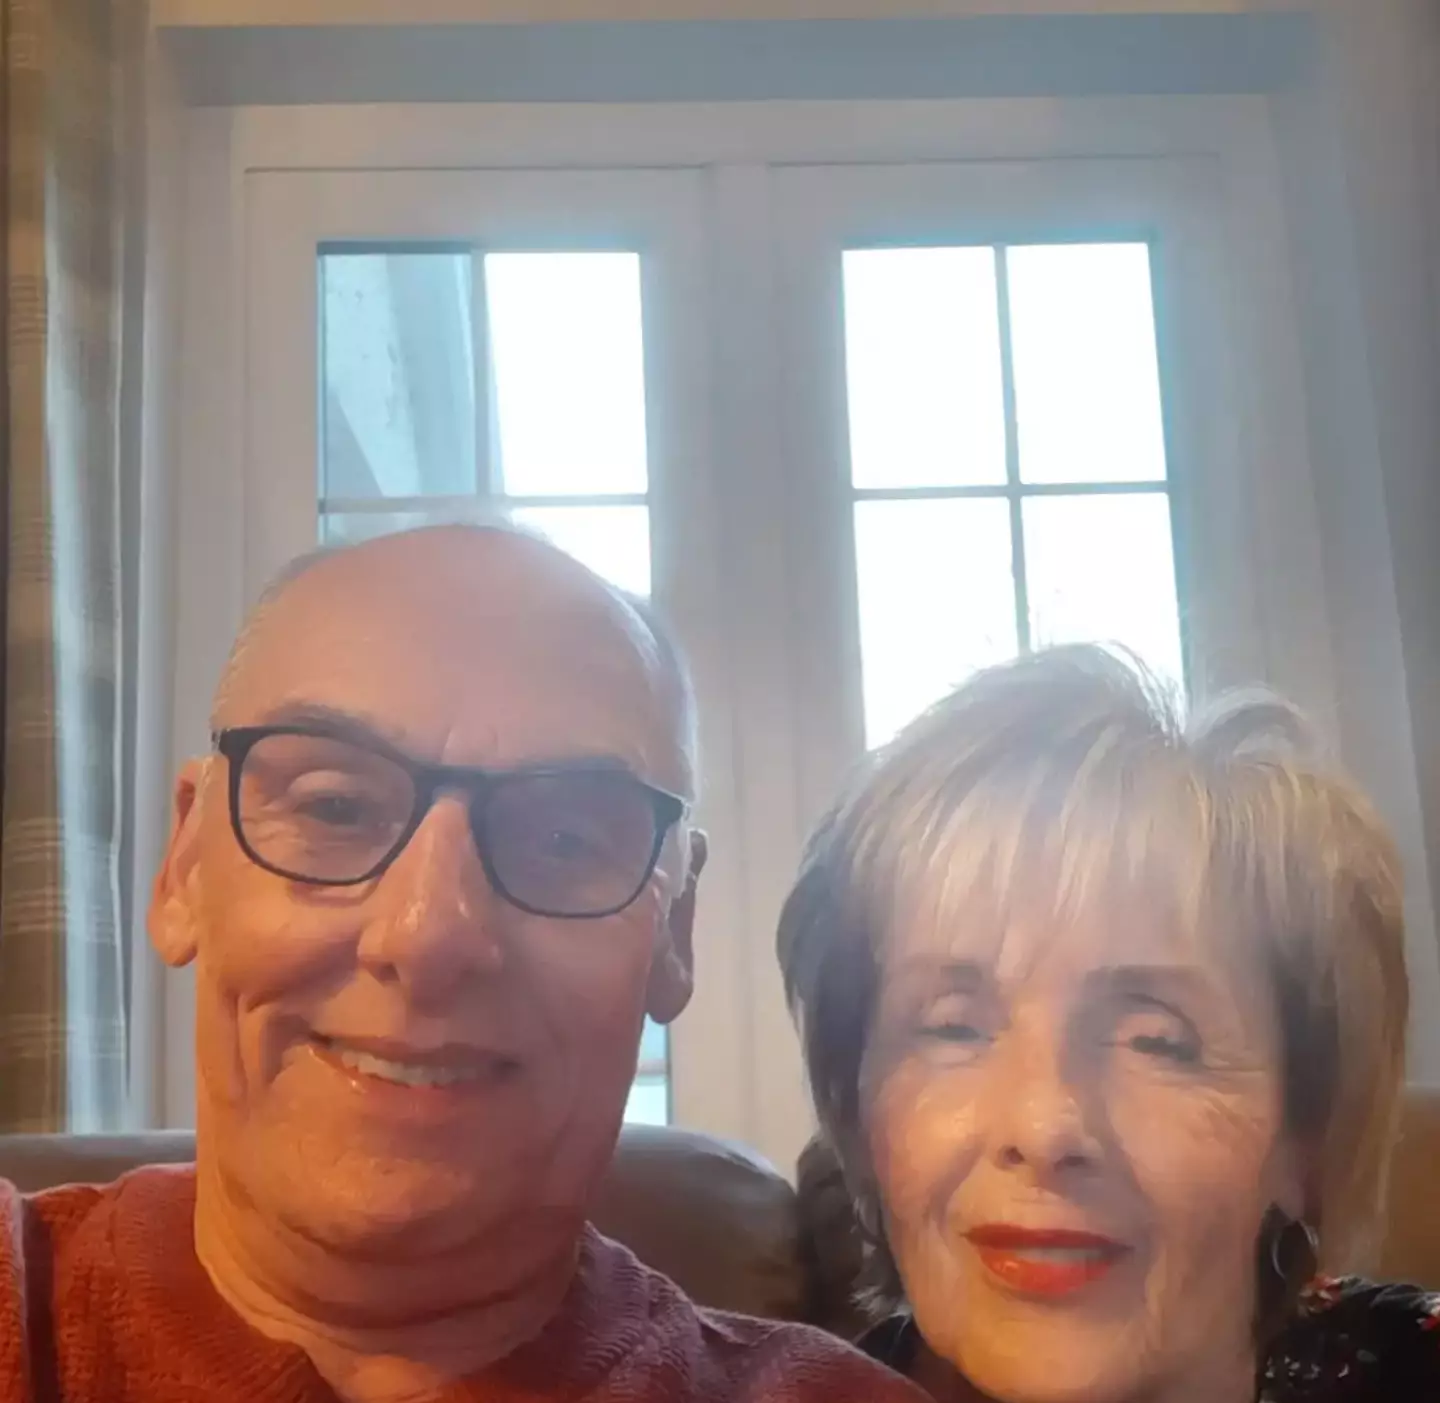 Dave and Shirley also share cute selfies on Instagram too. (